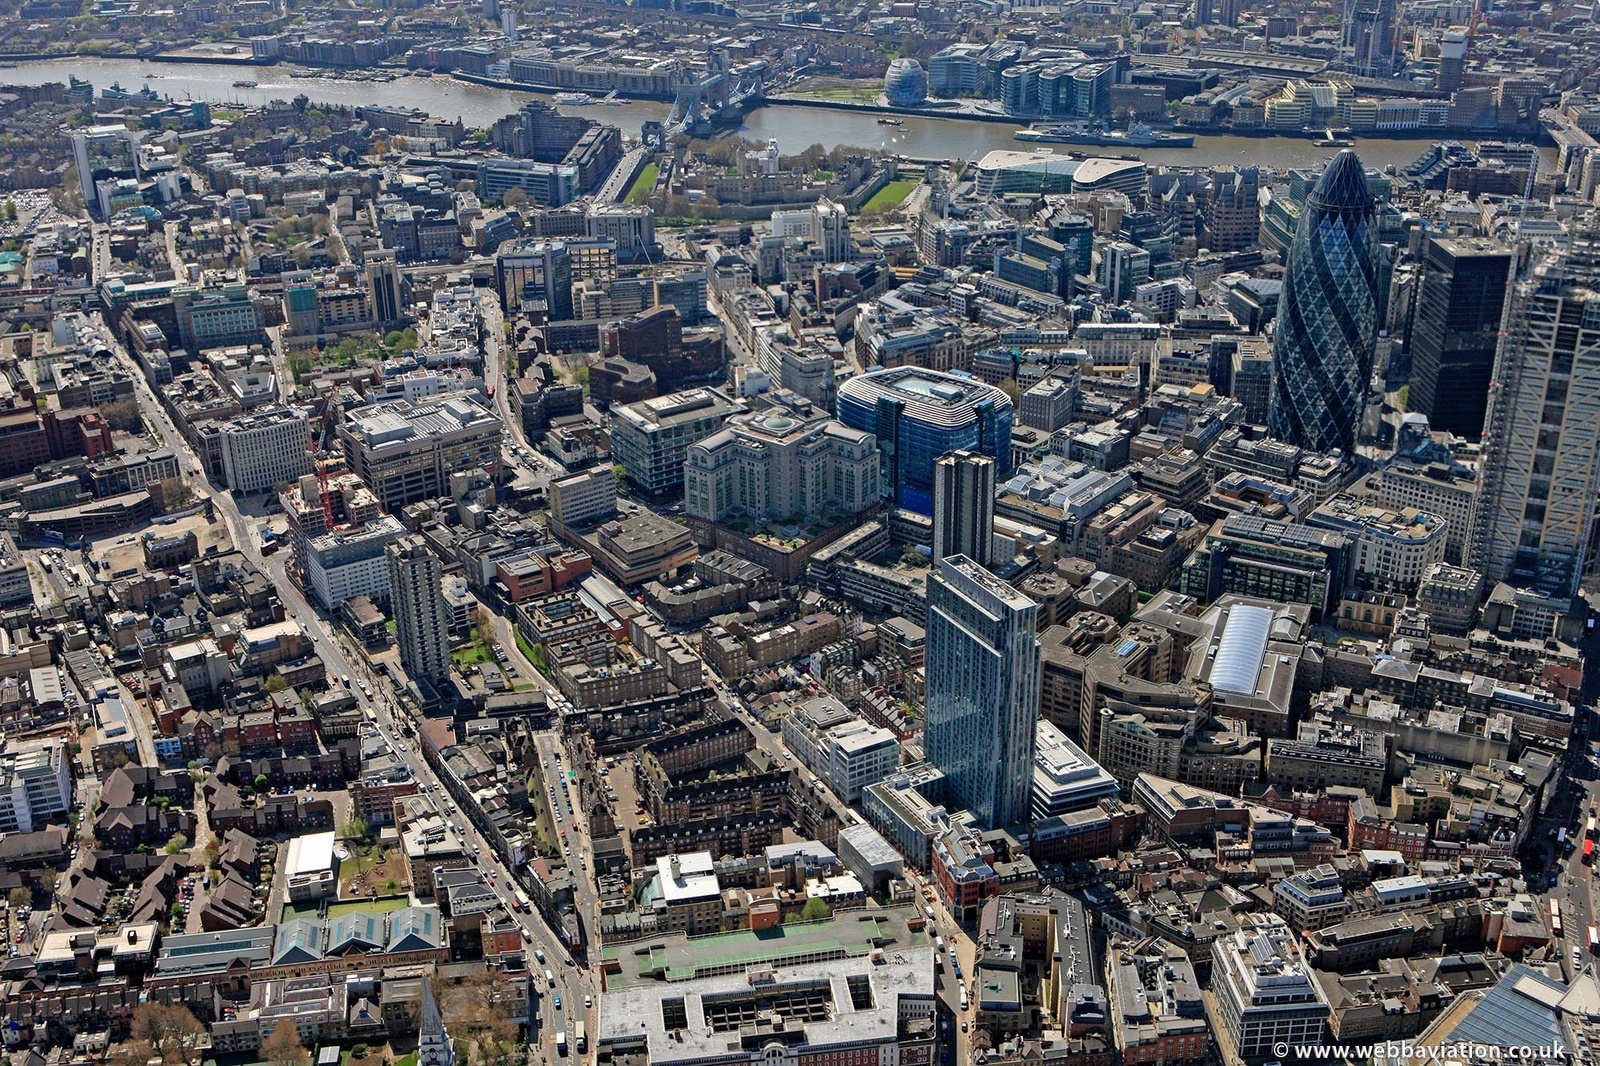 Spitalfields London from the air